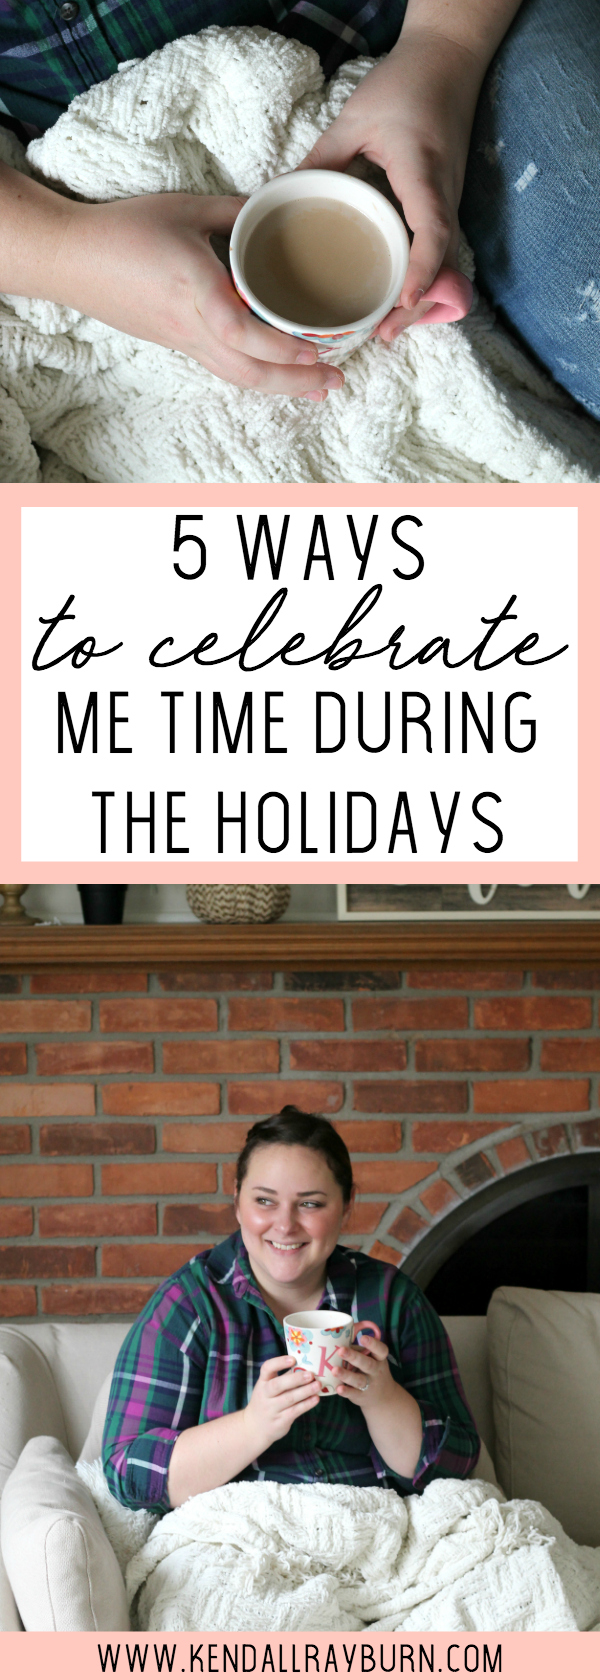 5 Ways to Celebrate Me Time During the Holidays